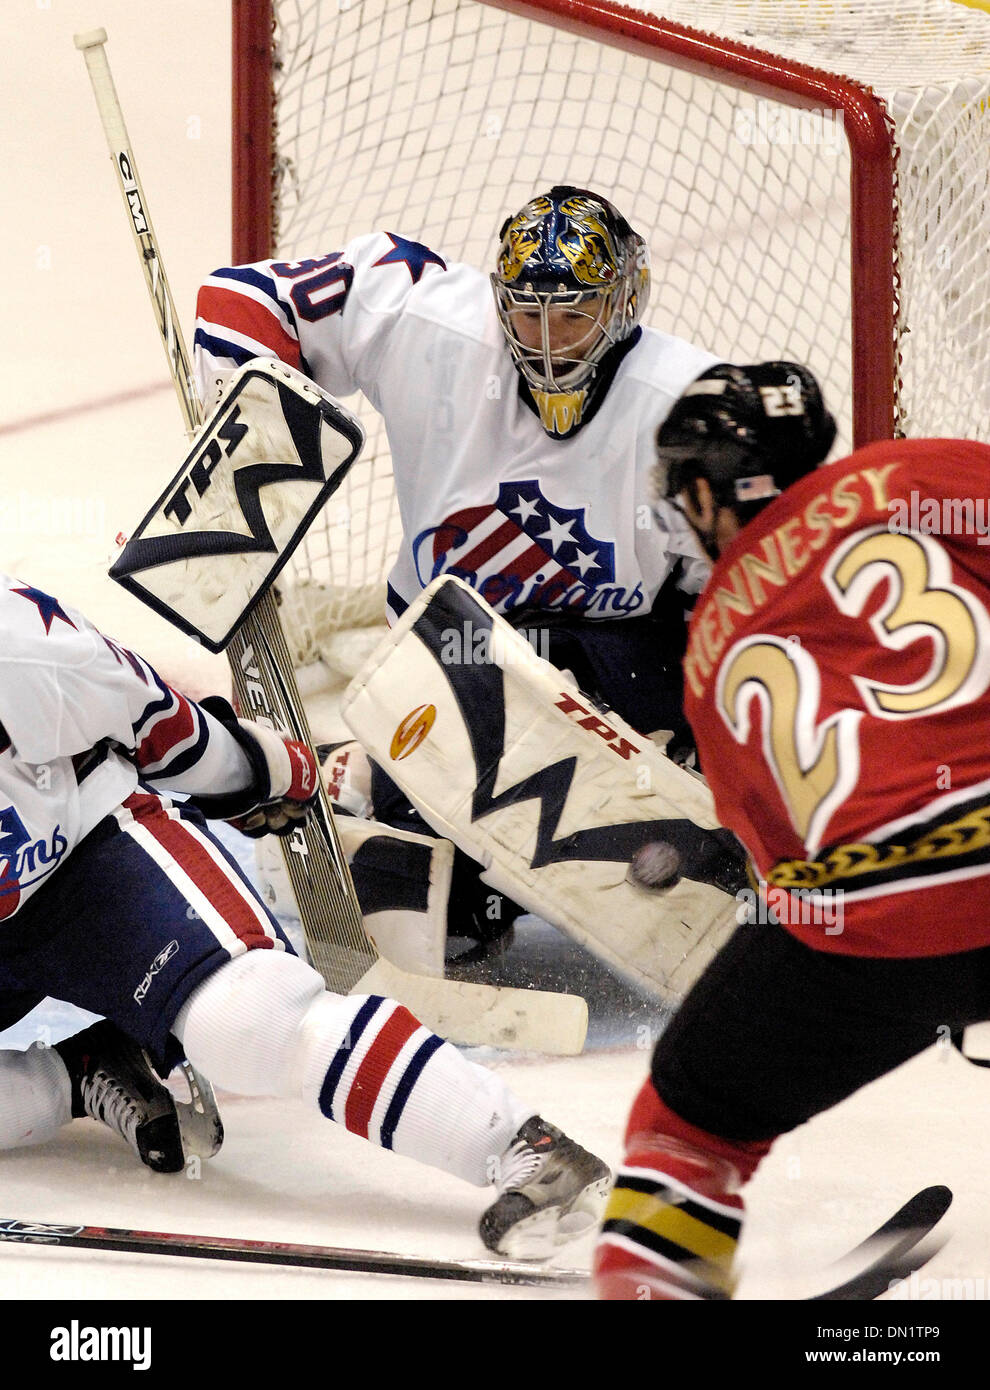 October 13, 2006: AHL - Rochester goalie Craig Anderson (30) makes the save against Binghamton - Binghamton Senators at Rochester Americans at The Blue Cross Arena in Rochester, New York. Rochester defeated Binghamton in a shootout.(Credit Image: © Alan Schwartz/Cal Sport Media) Stock Photo